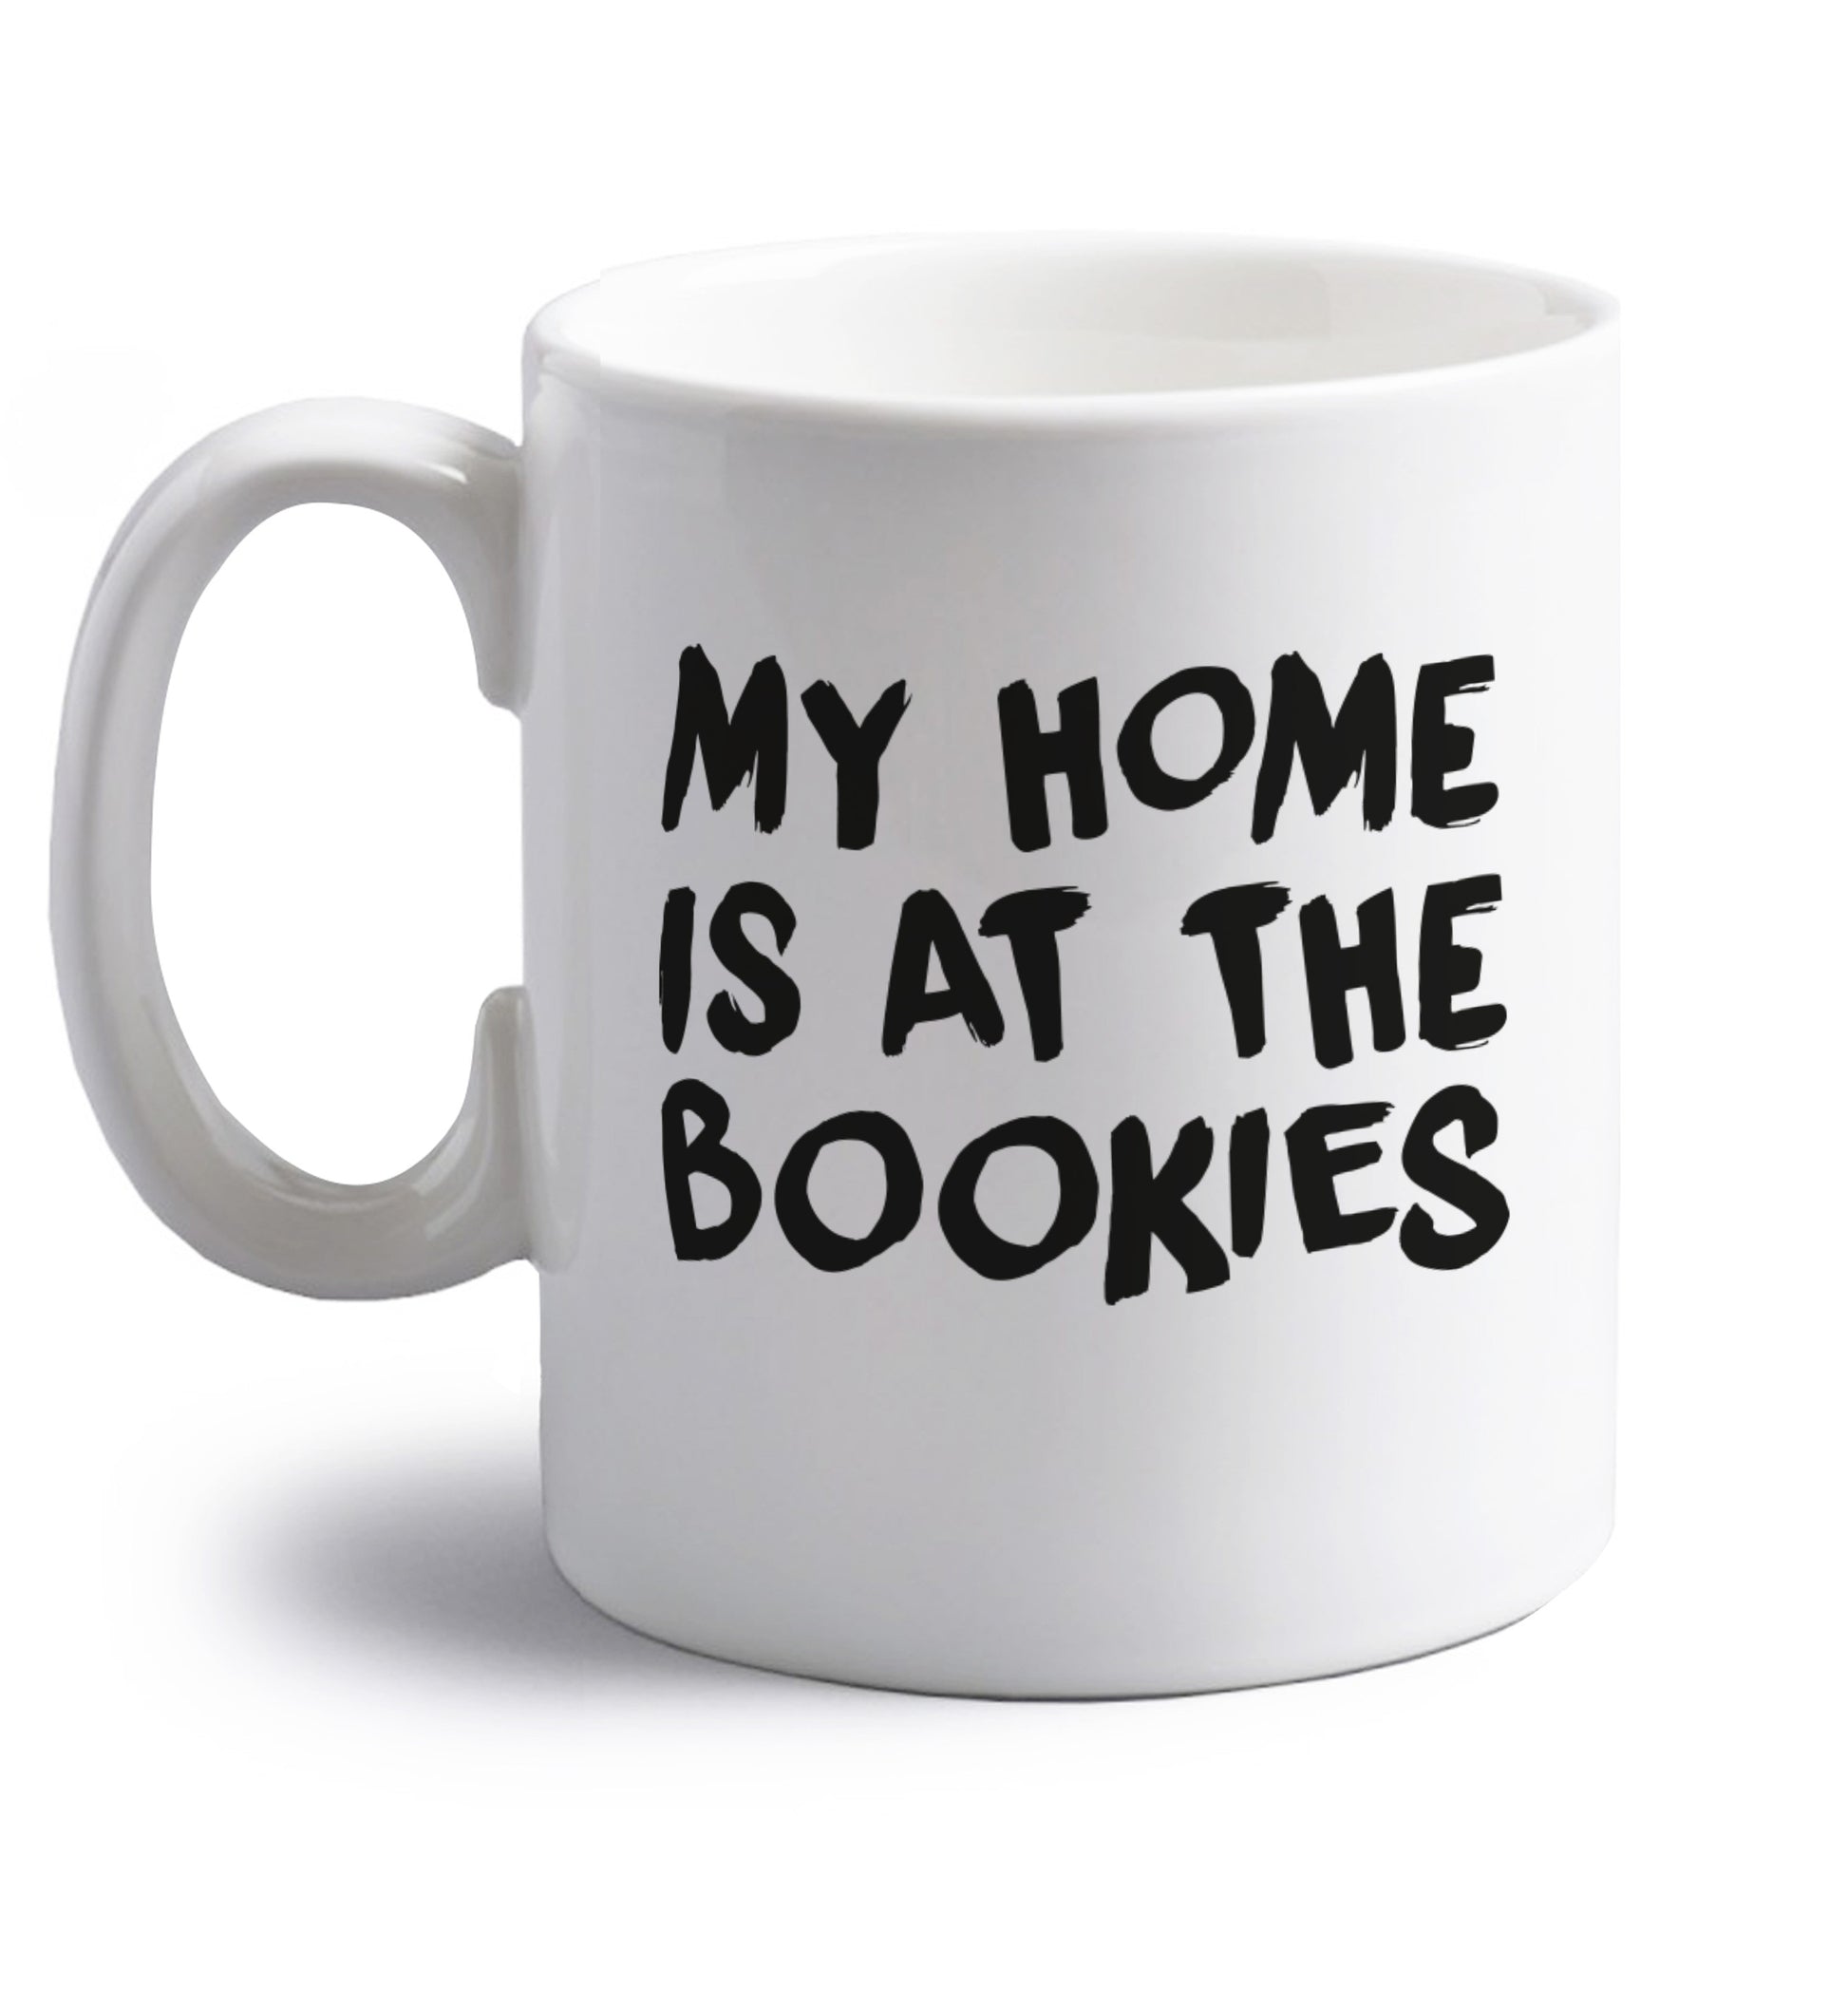 My home is at the bookies right handed white ceramic mug 